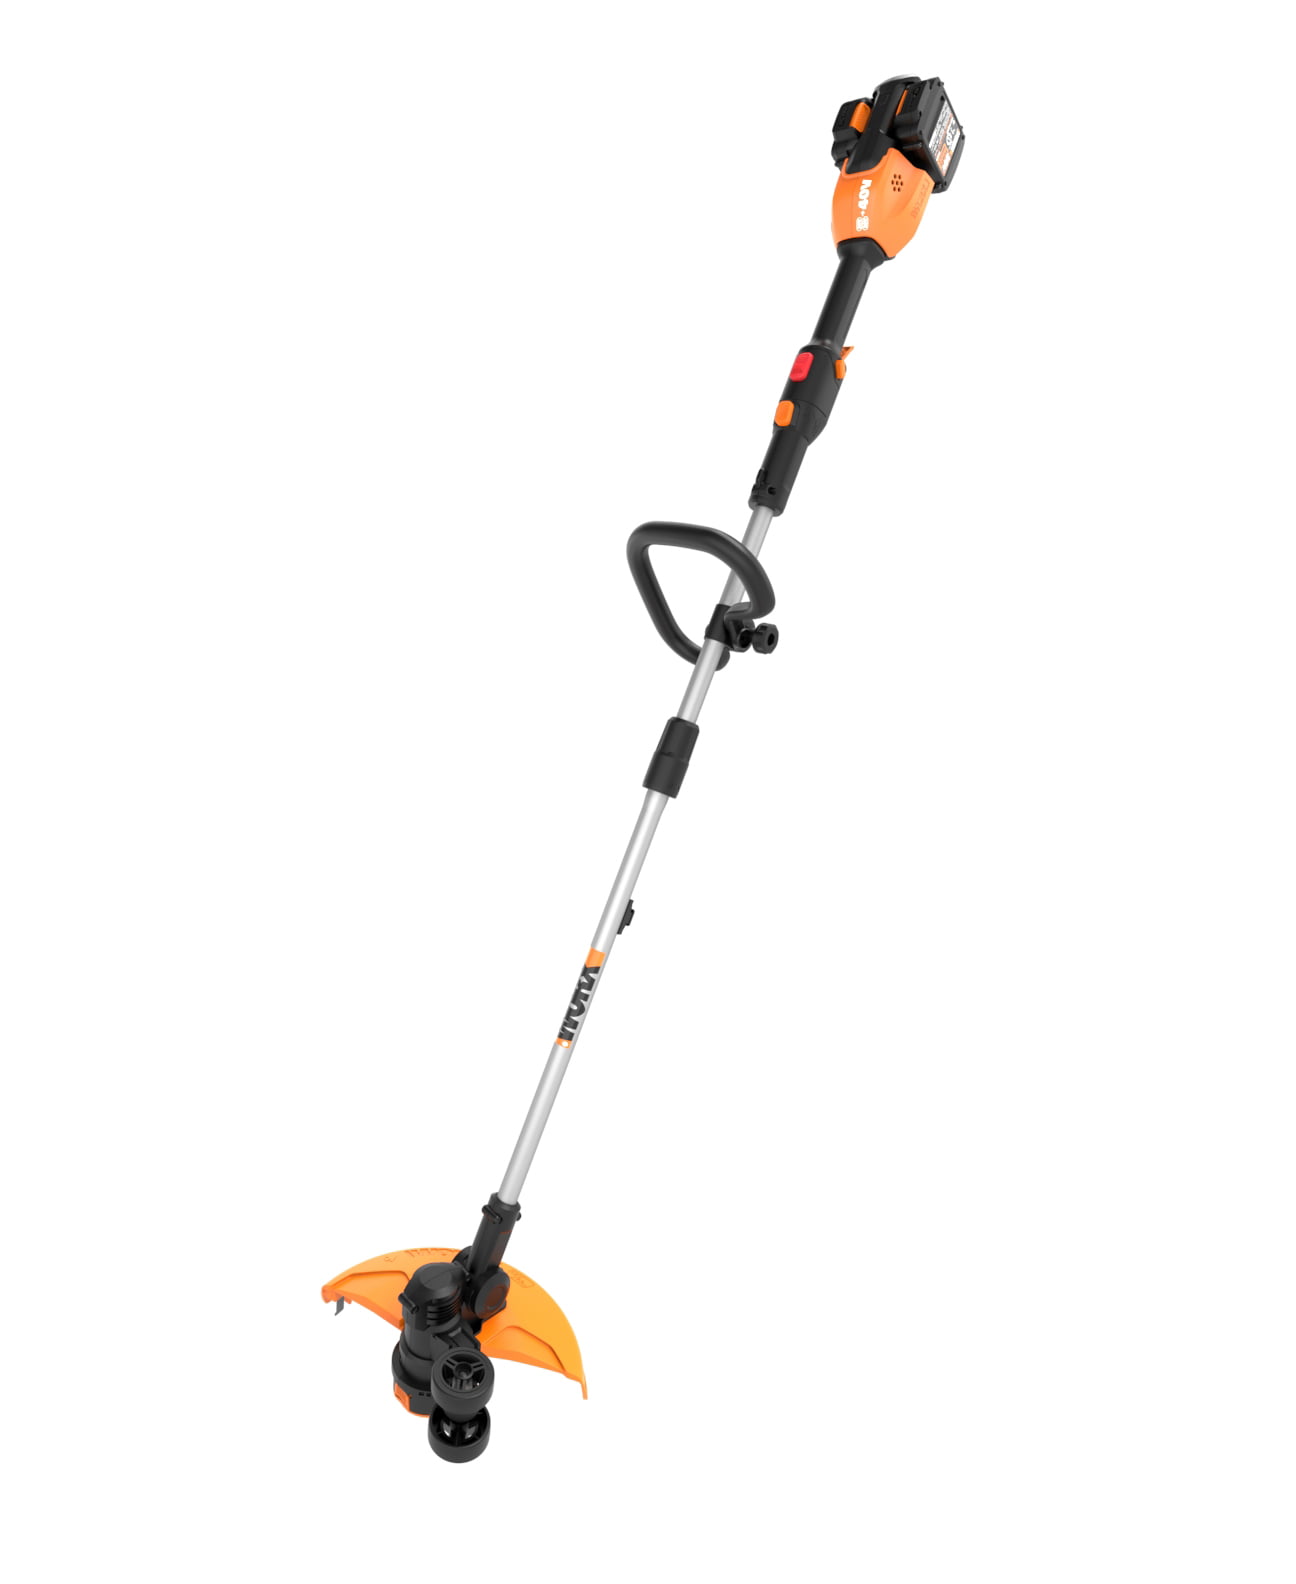 and Command Feed Worx WG184 40V Dual Charger 2.0Ah 1 hr 13 Cordless Grass Trimmer/Edger with in-Line Edging 2 Batteries 